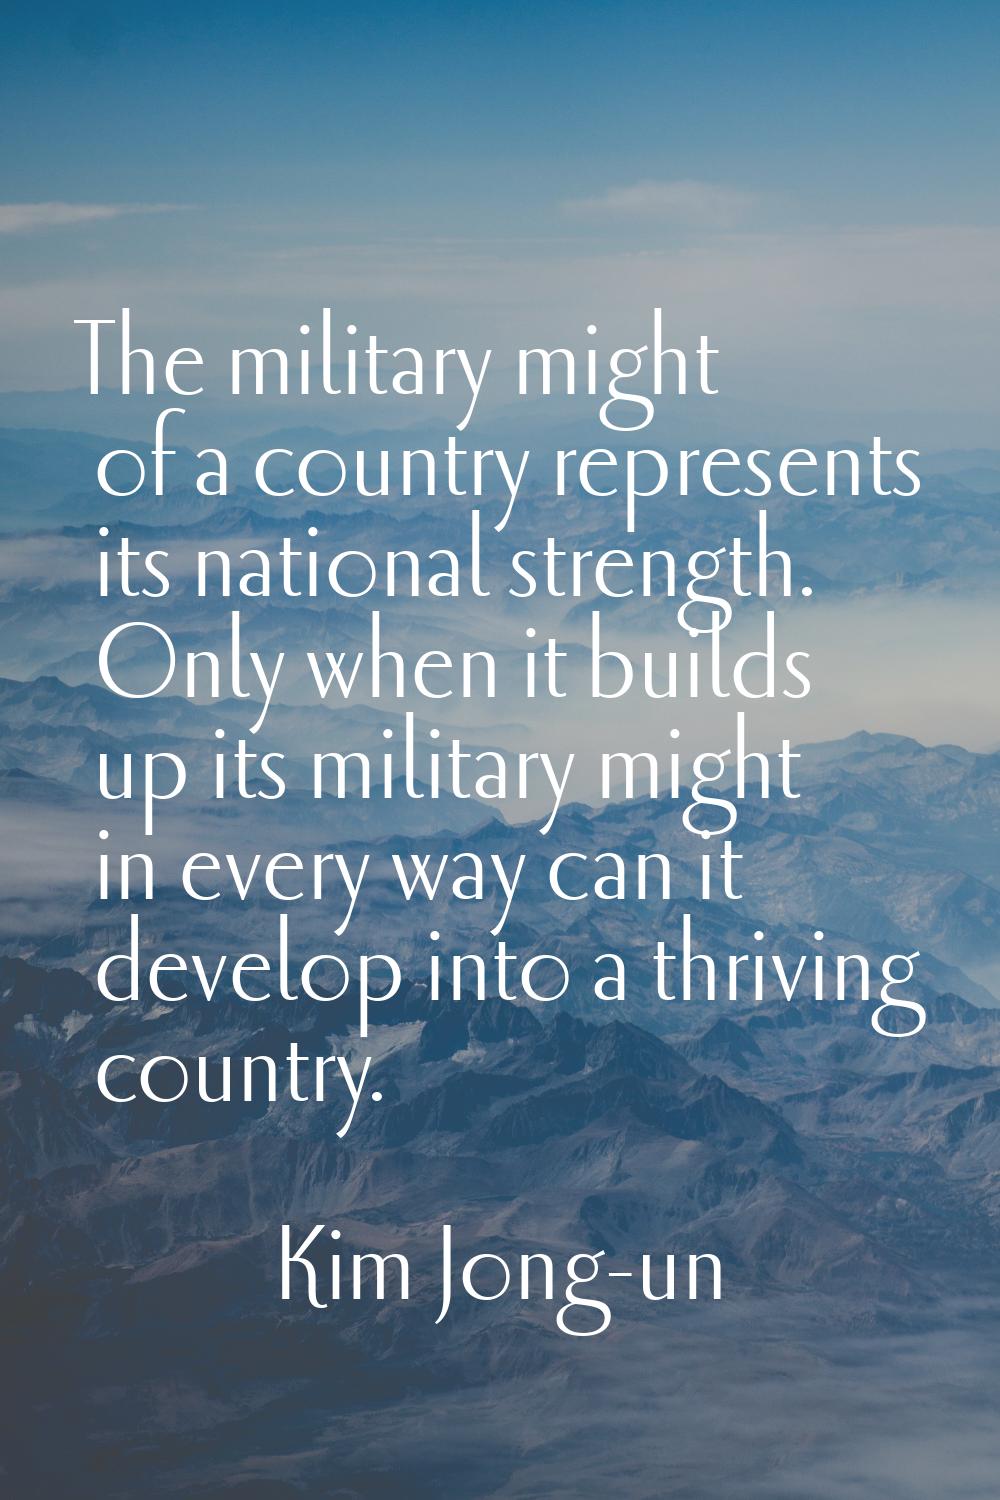 The military might of a country represents its national strength. Only when it builds up its milita